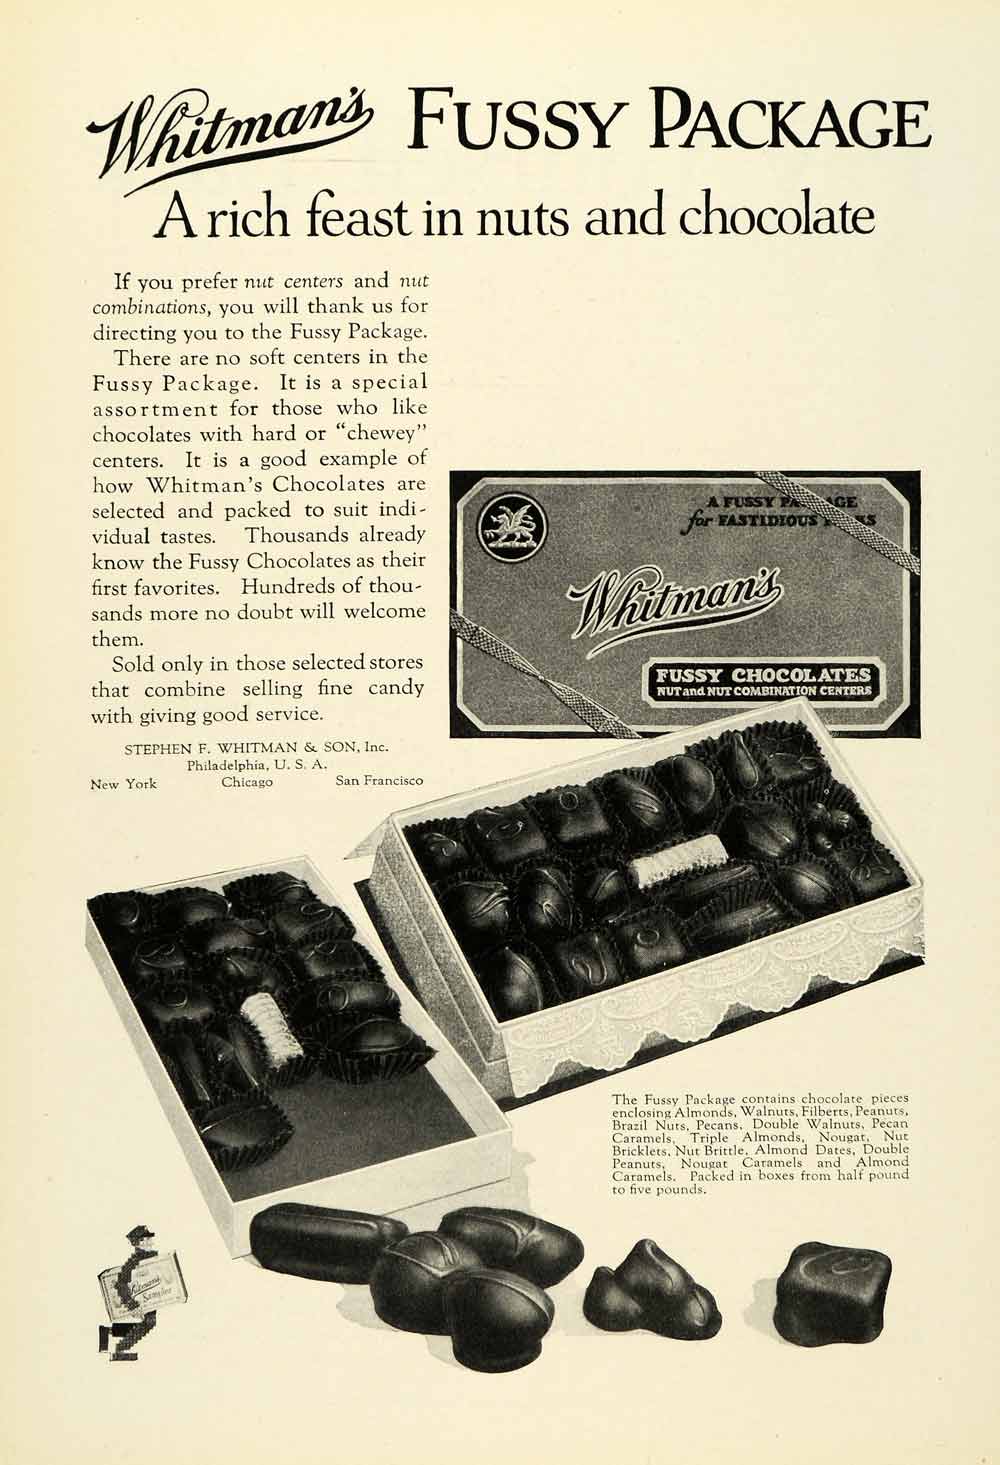 1925 Ad Whitman's Fussy Package Chocolates Nut Centers Advertisement NGM2